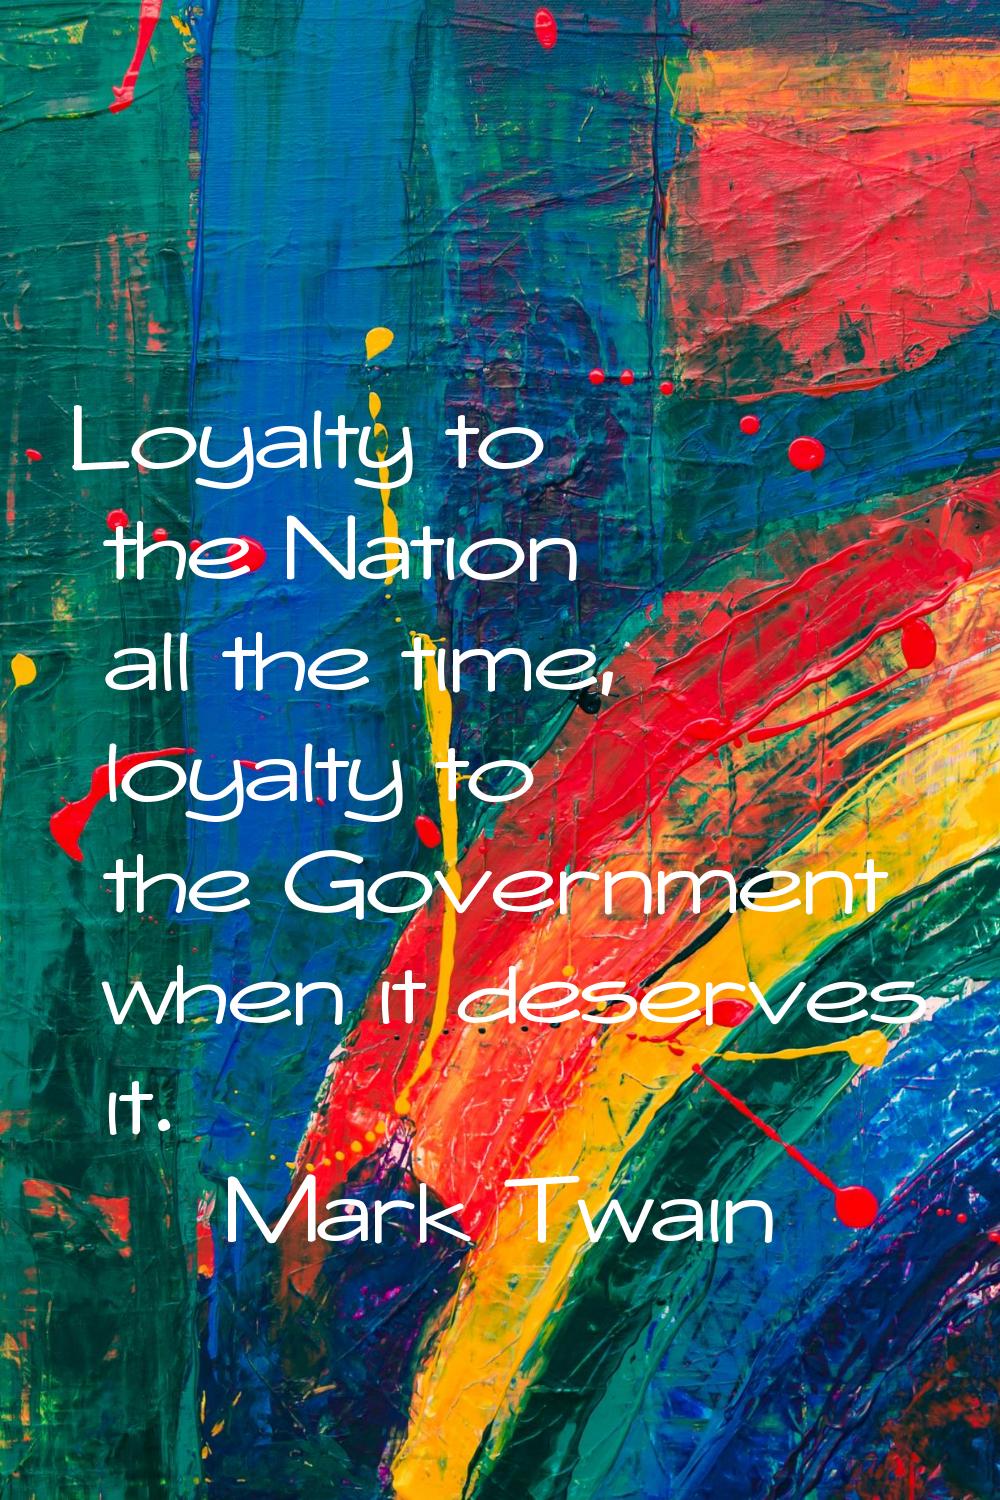 Loyalty to the Nation all the time, loyalty to the Government when it deserves it.